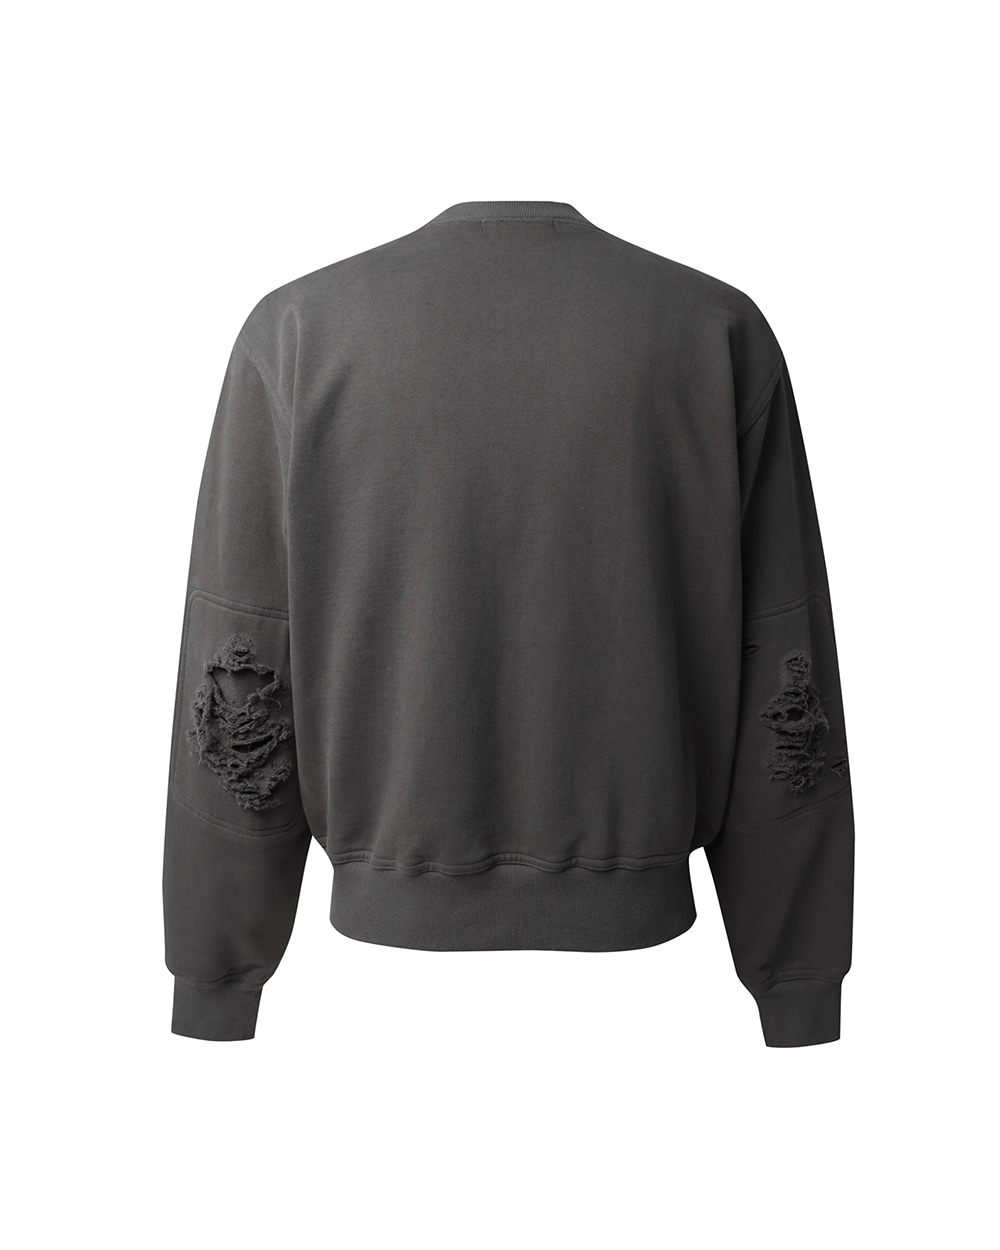 ATE STUDIOS AUTHENTIC SCAR SWEAT SHIRTS (Charcoal)